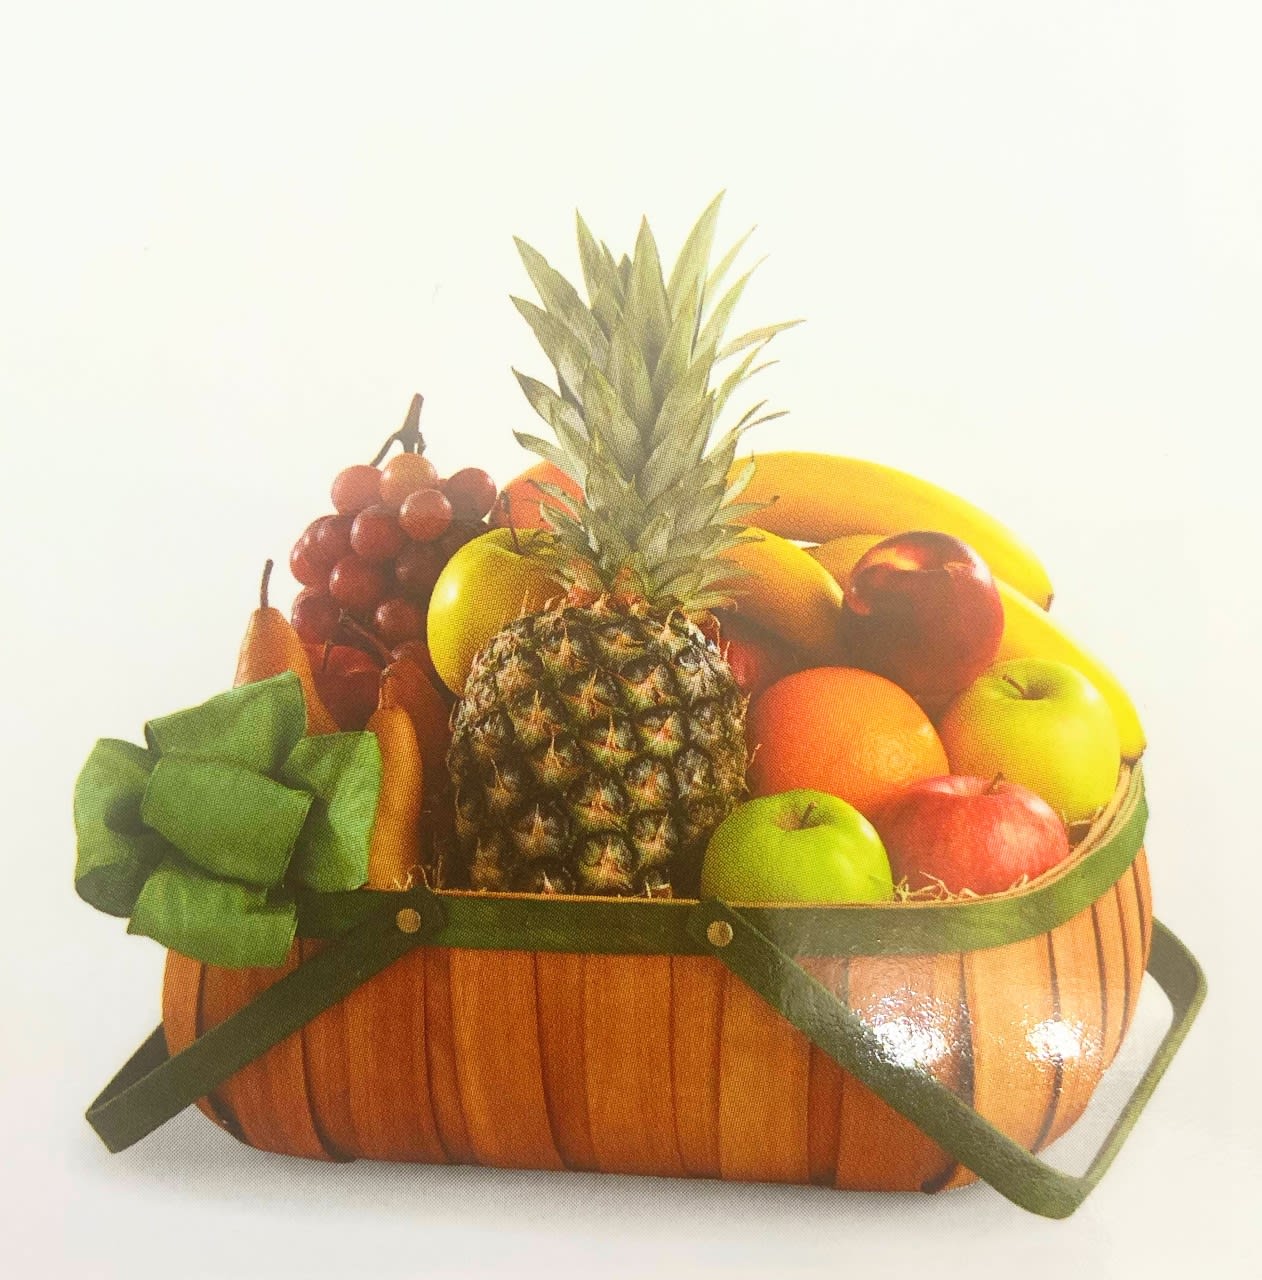 Bountiful Fresh Fruit Basket - Your gift of the freshest fruit available will be enjoyed by all who receive it. Attractively arranged in a sturdy wicker basket five different fruit including a pineapple will be enough to be enjoyed entire family and their guests.